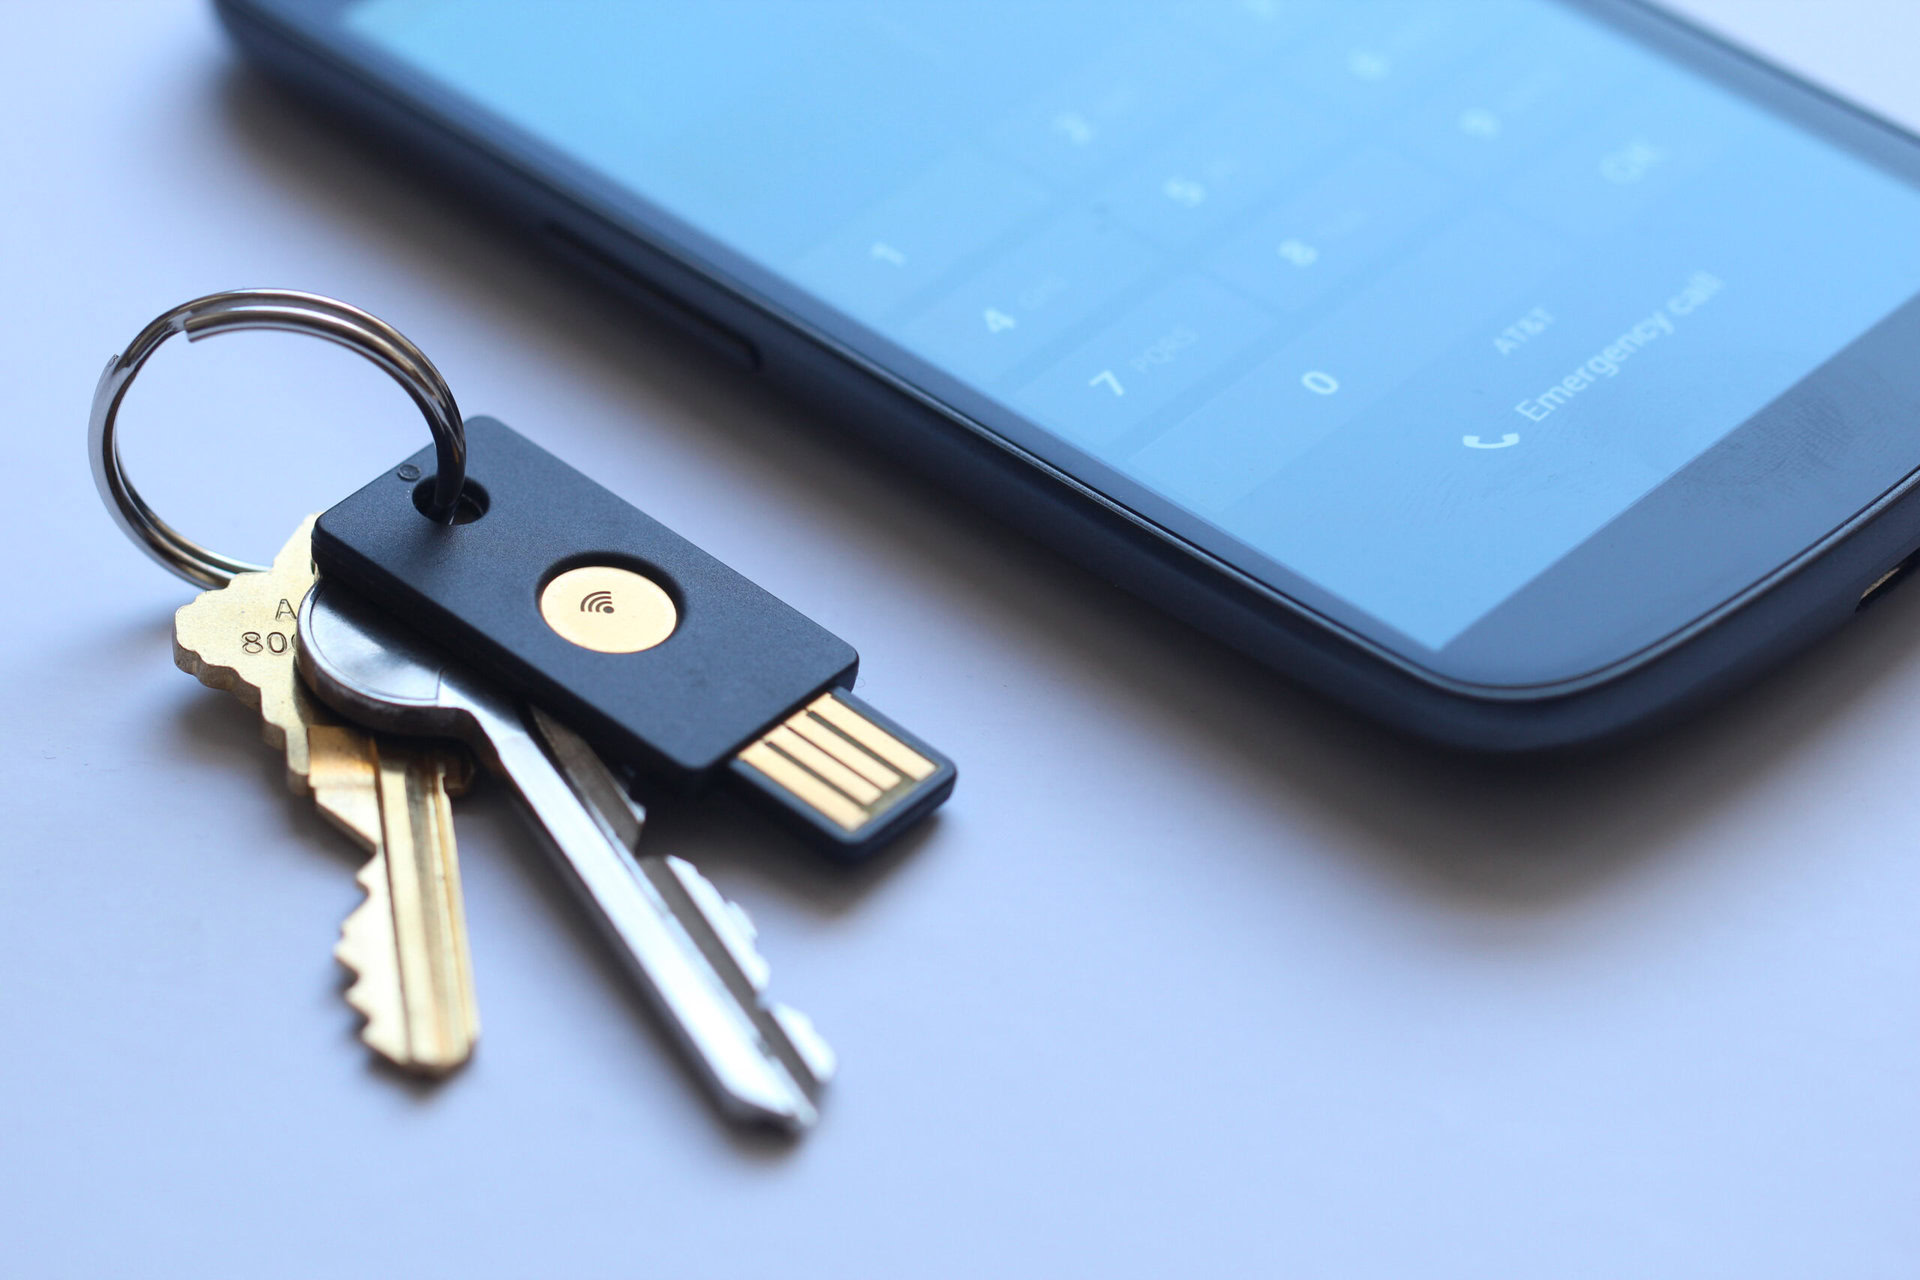 YubiKey attached to a keychain